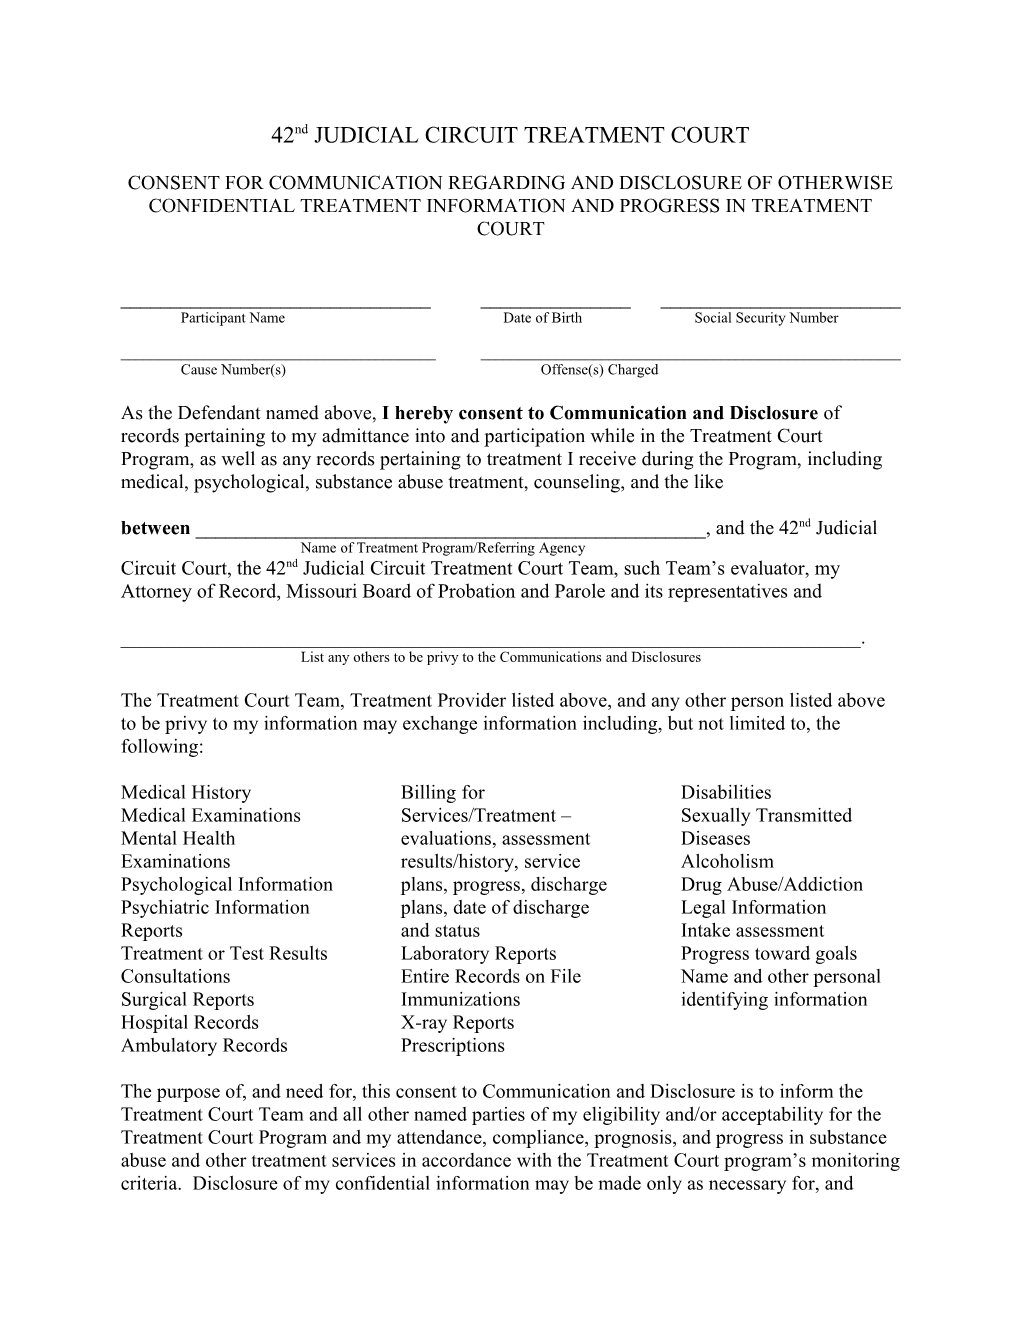 Consent for Disclosure of Confidential Substance Abuse Information: Drug Court Referral